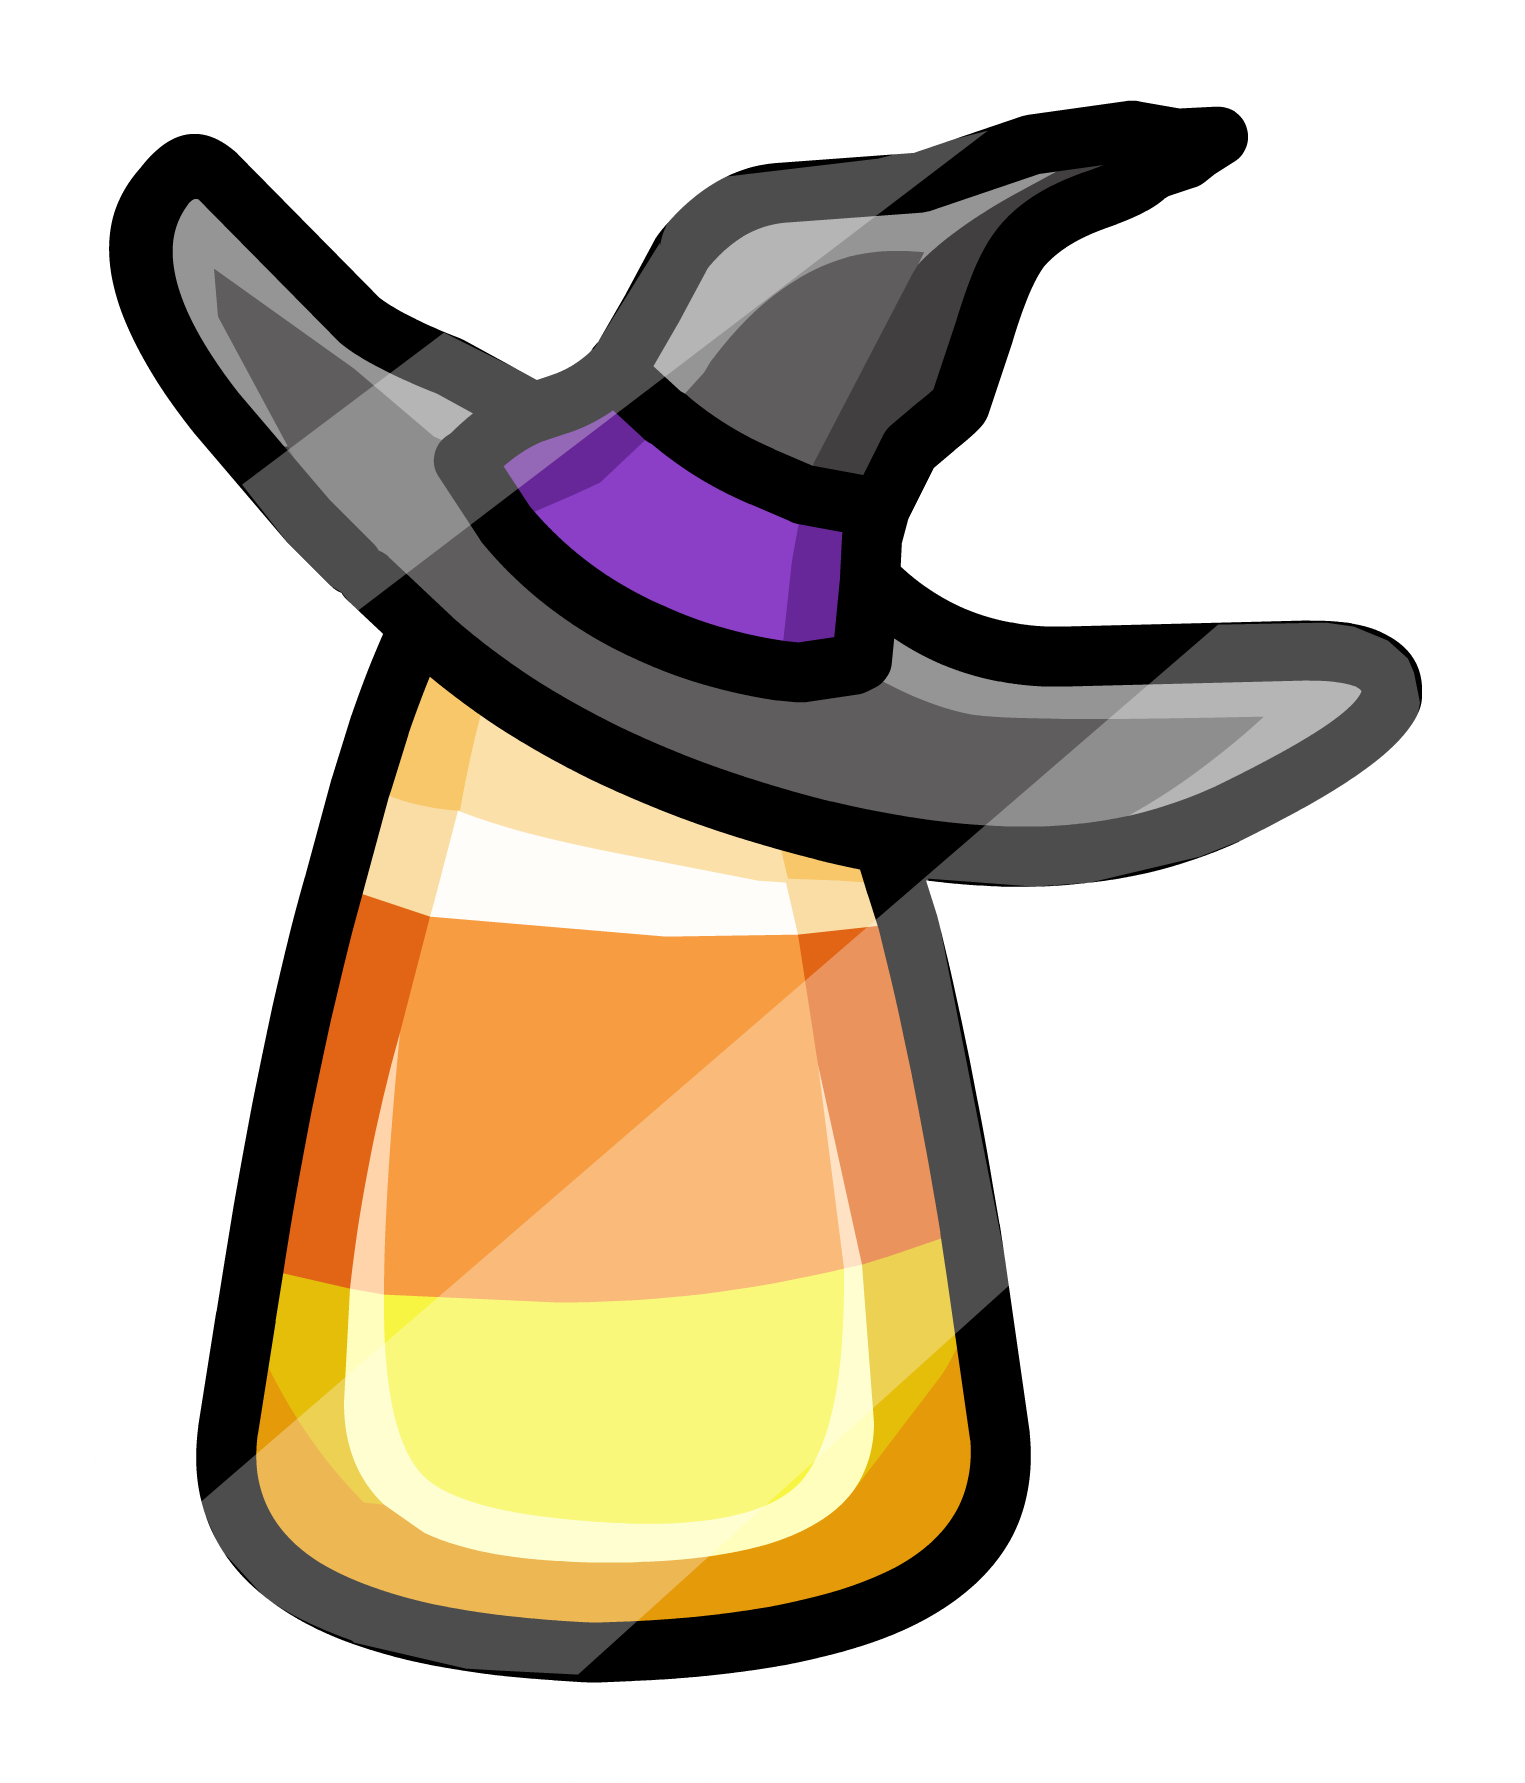 Candy Corn Potionwith Witch Hat PNG